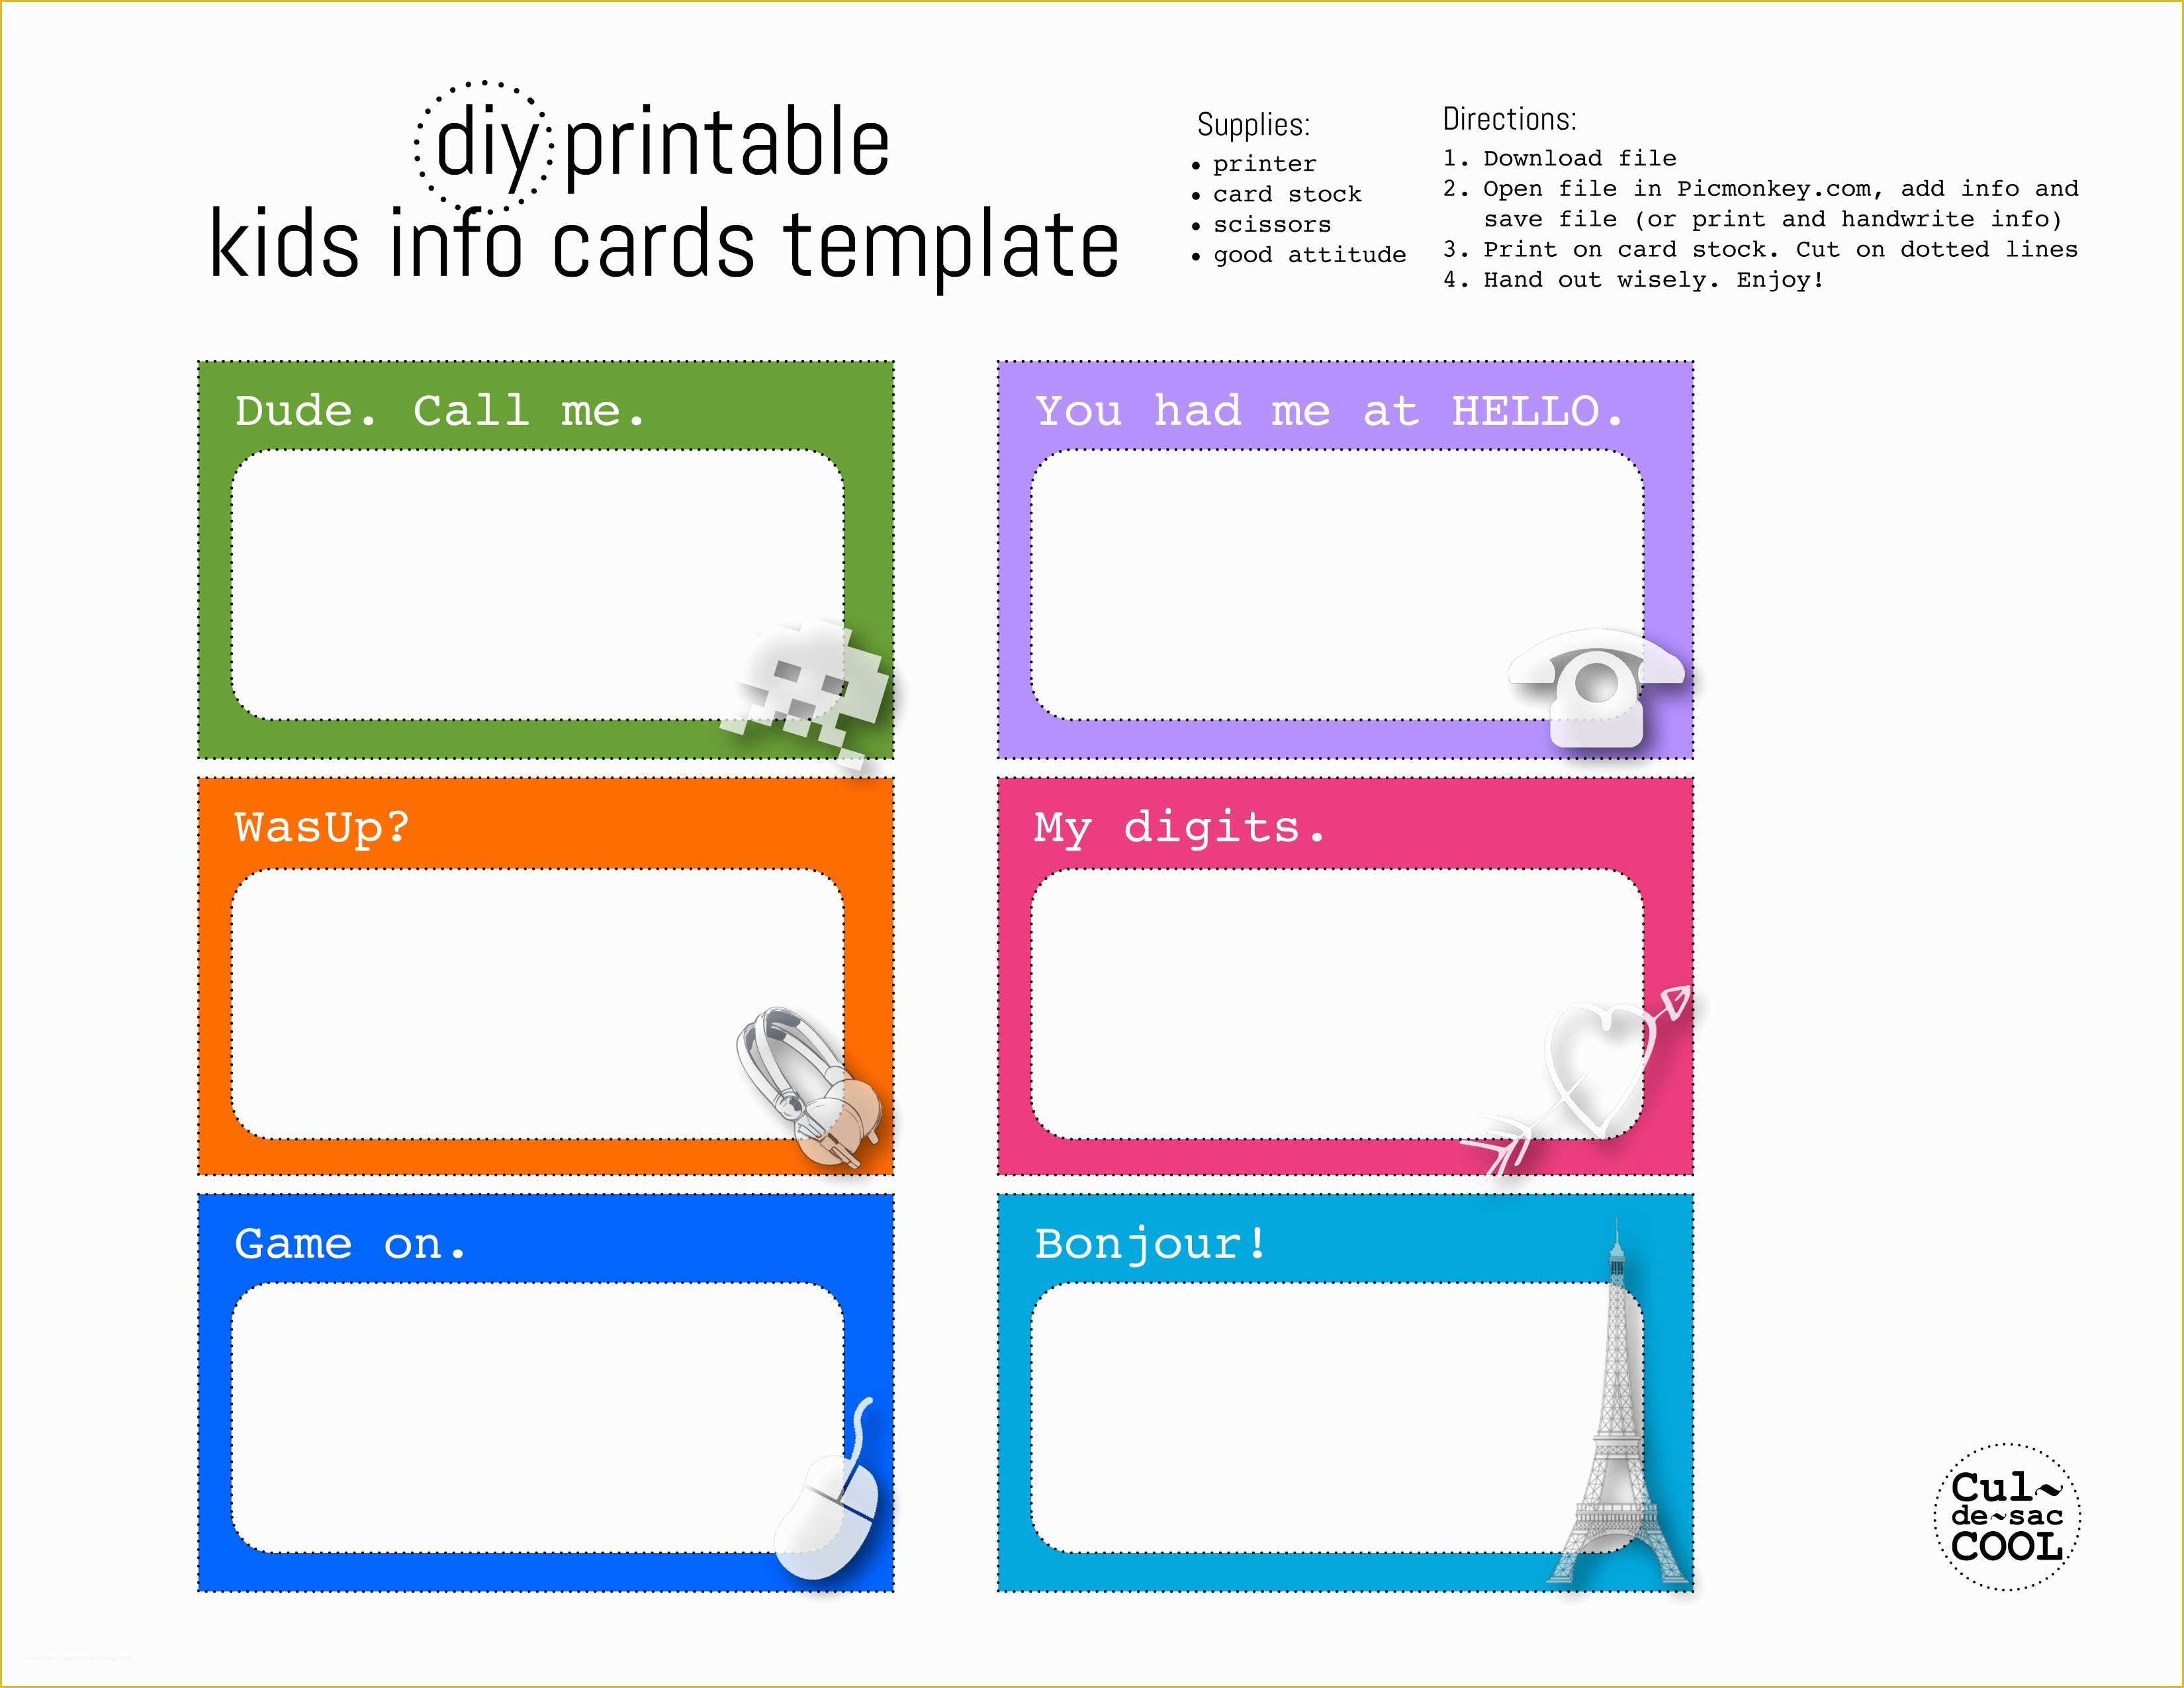 Free Printable Business Card Templates Of Diy Printable Kids Info Cards Template